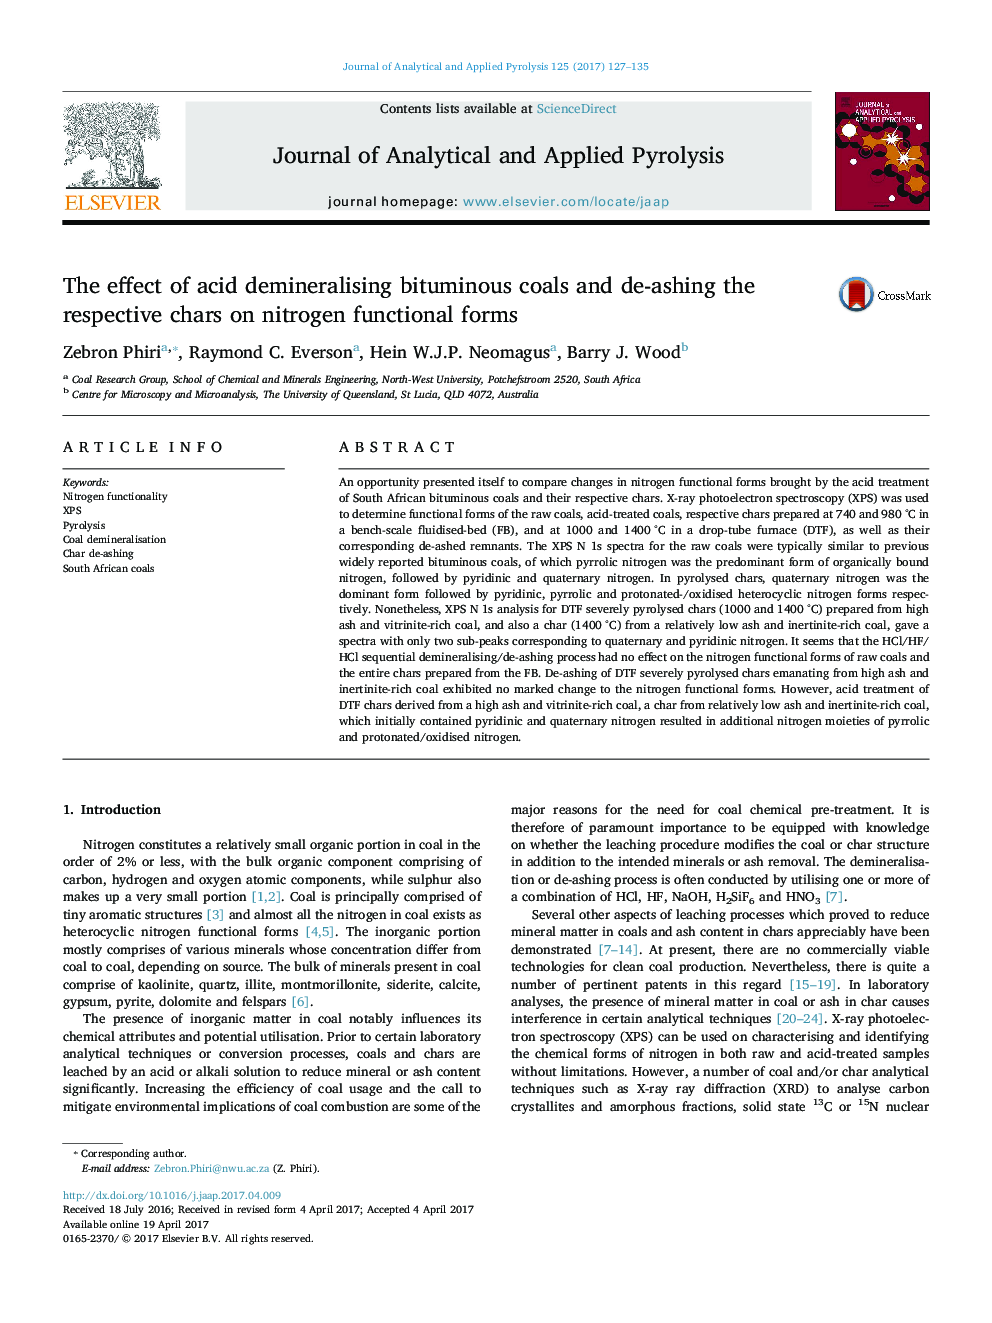 The effect of acid demineralising bituminous coals and de-ashing the respective chars on nitrogen functional forms